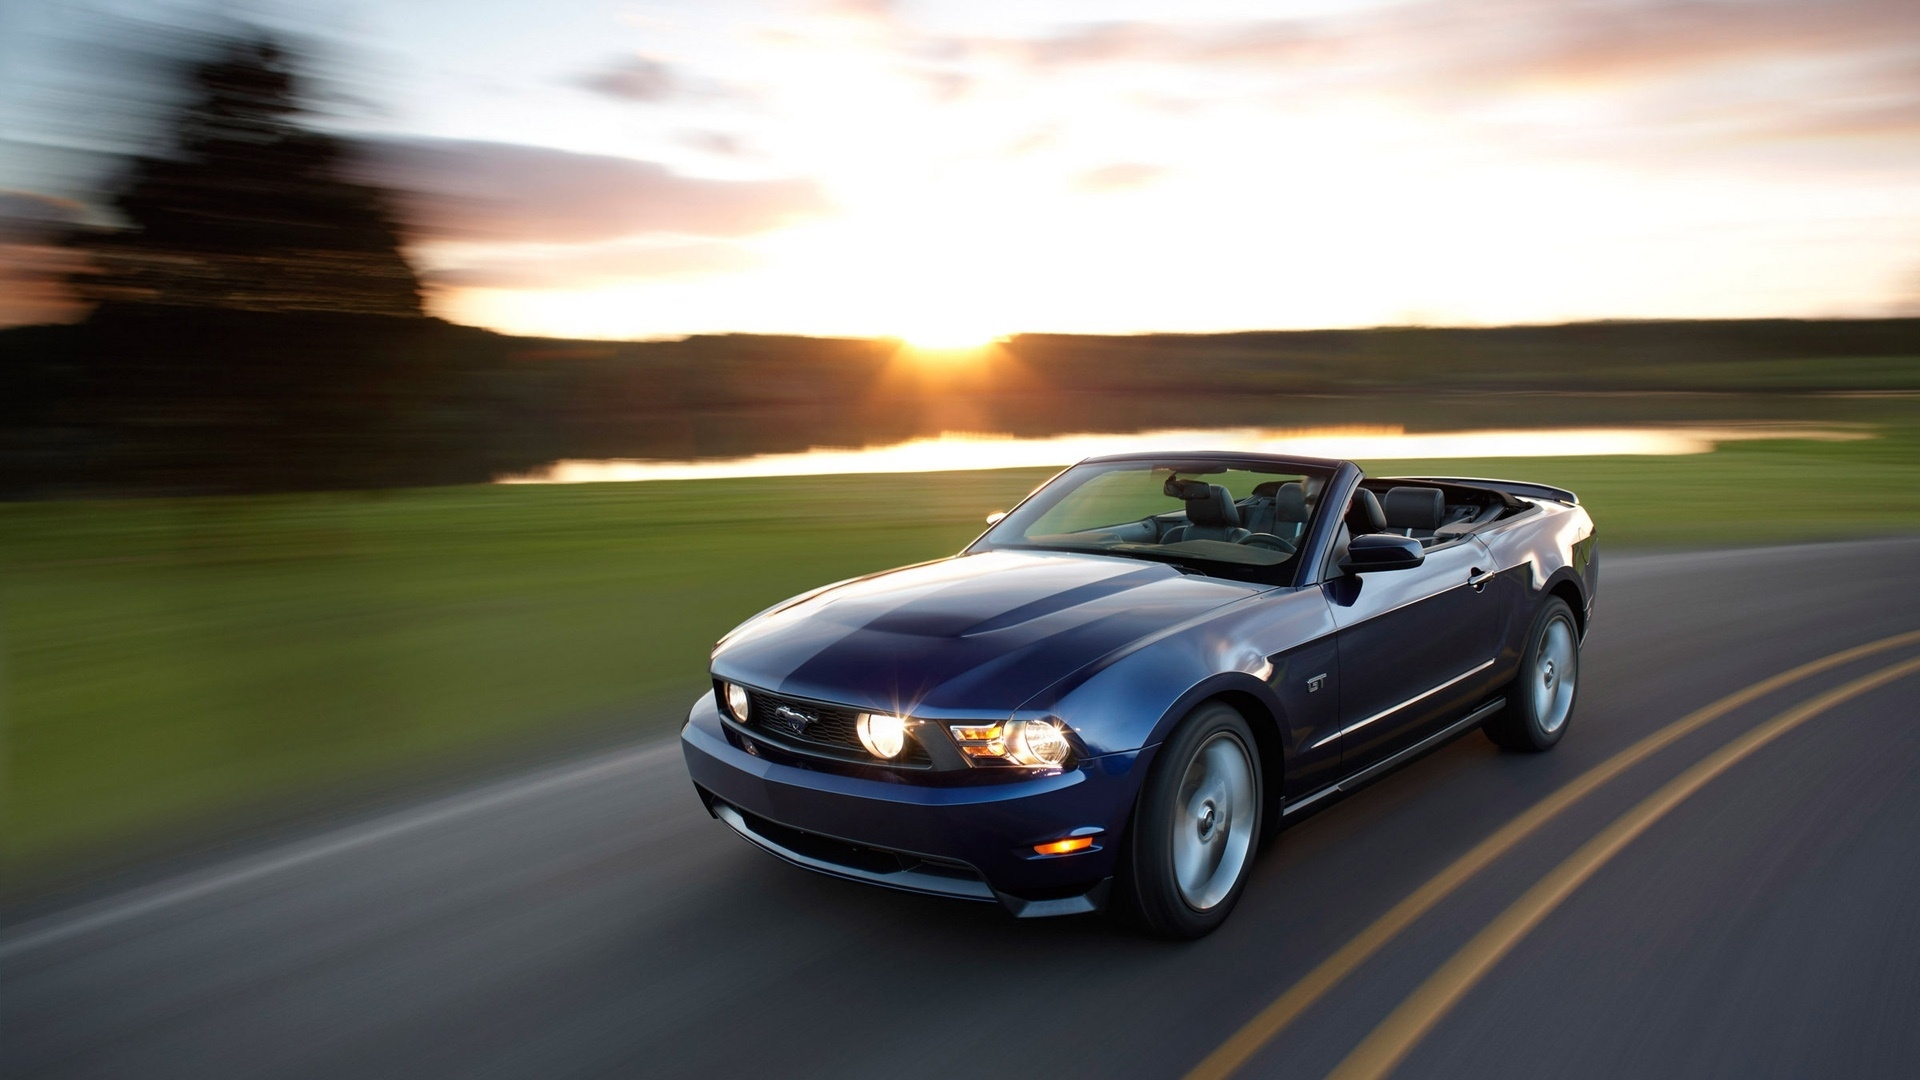 Ford Mustang Convertible 2010 for 1920 x 1080 HDTV 1080p resolution